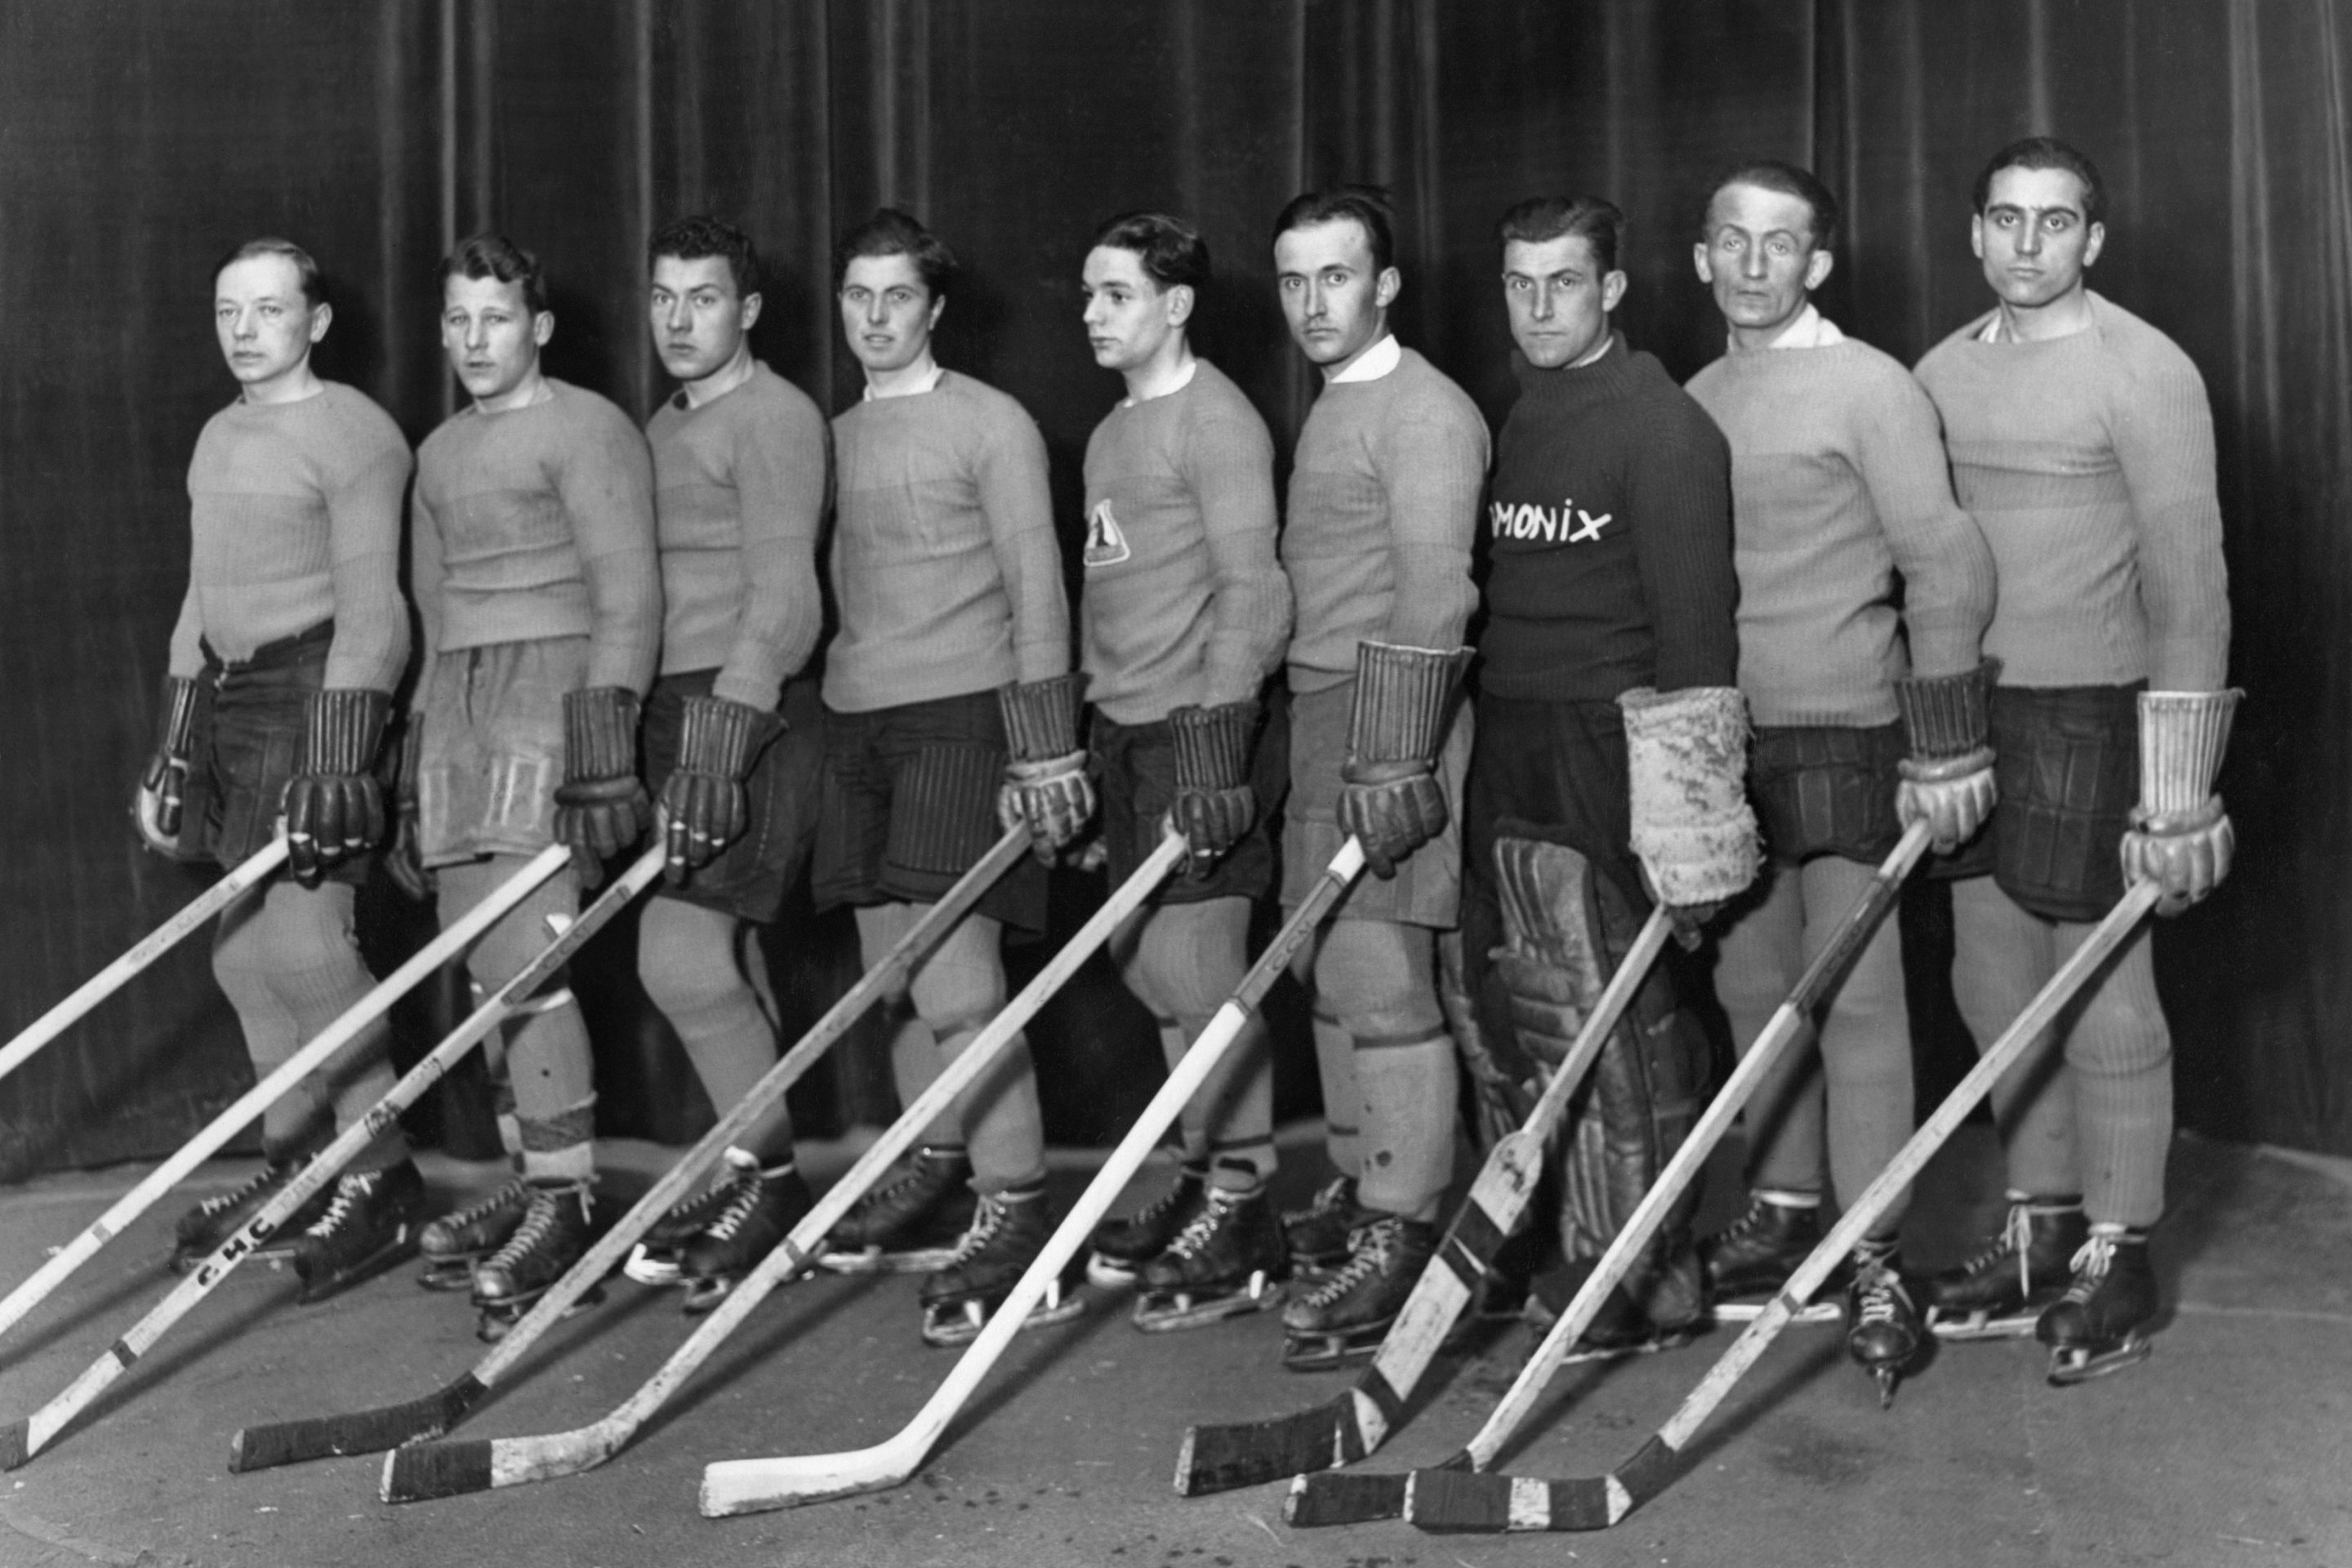 Picture taken in the 30s shows Chamonix's ice hockey players.